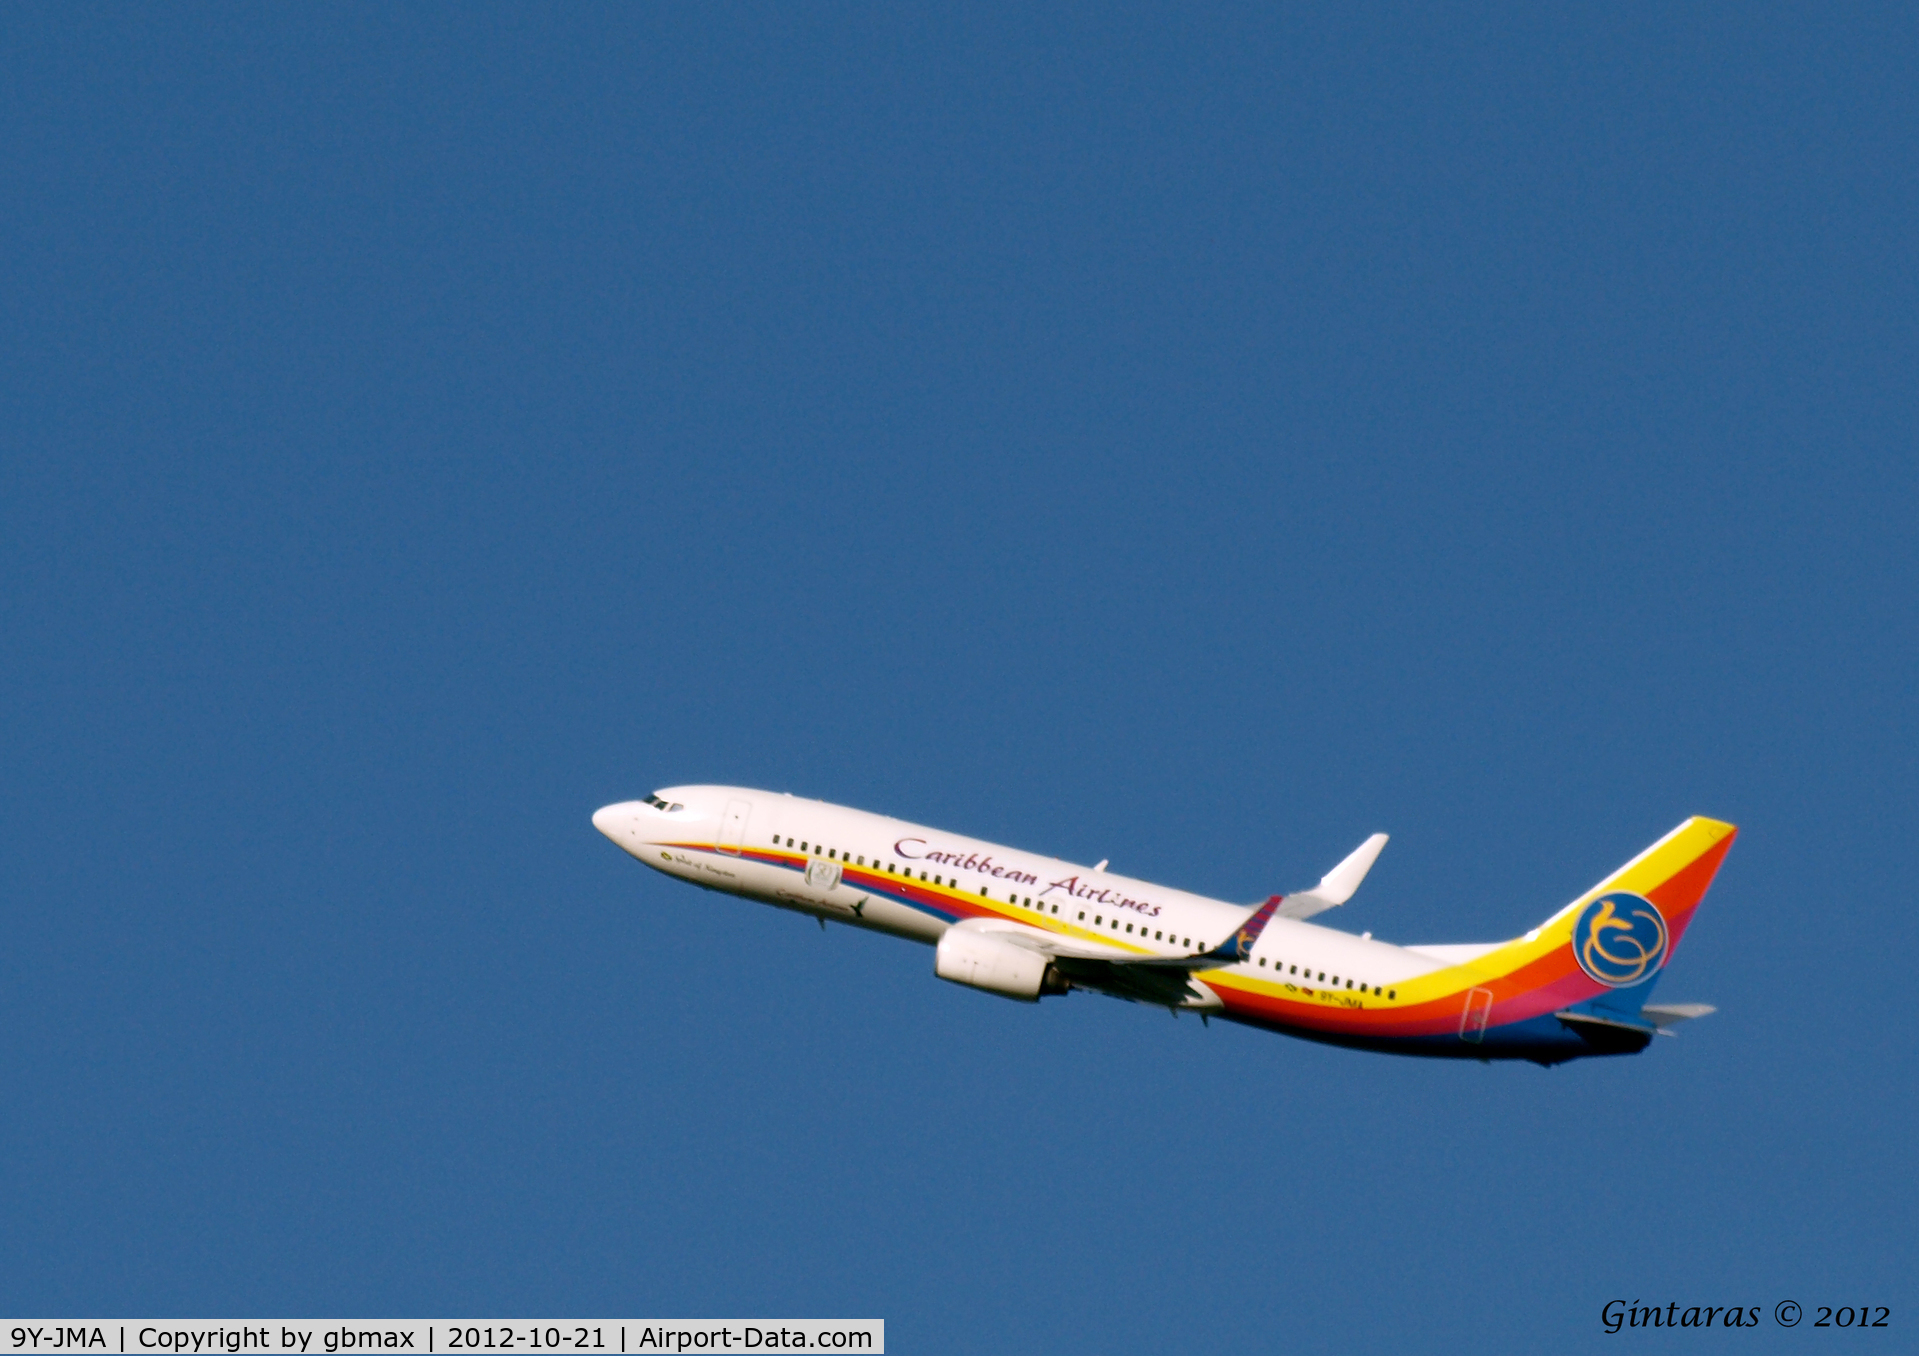 9Y-JMA, 2002 Boeing 737-8Q8 C/N 30645, After take-off from JFK